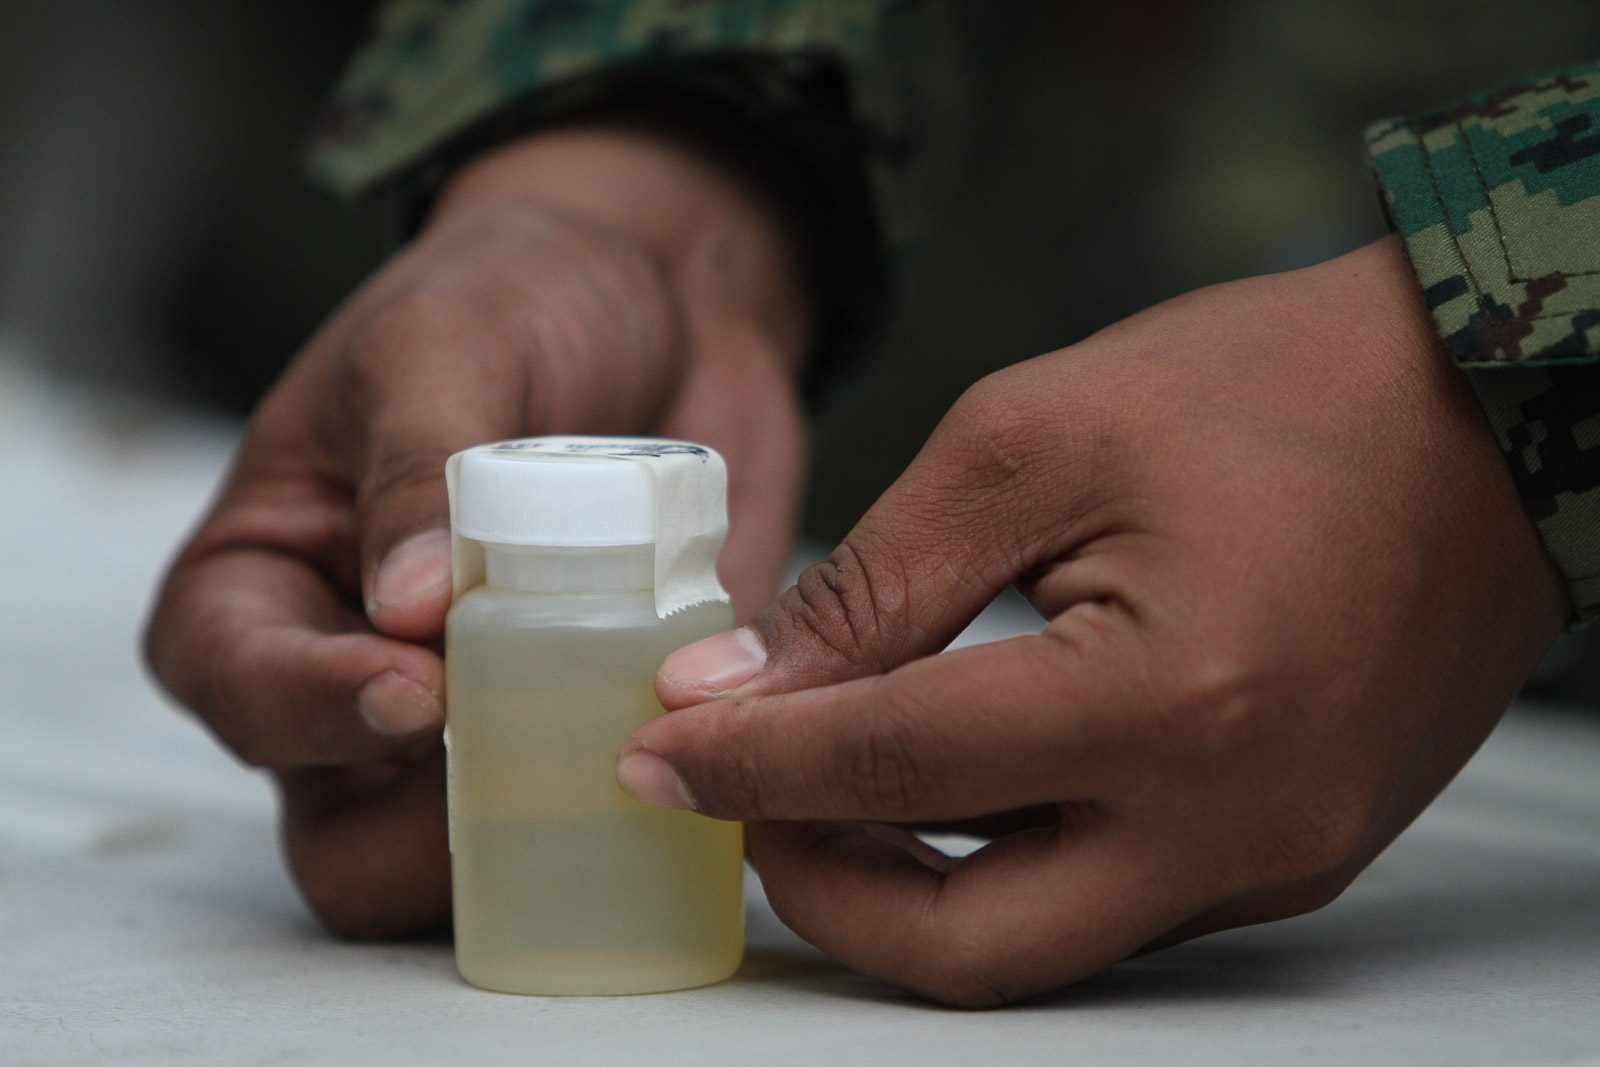 FAST FACTS: Drug tests in the Philippines